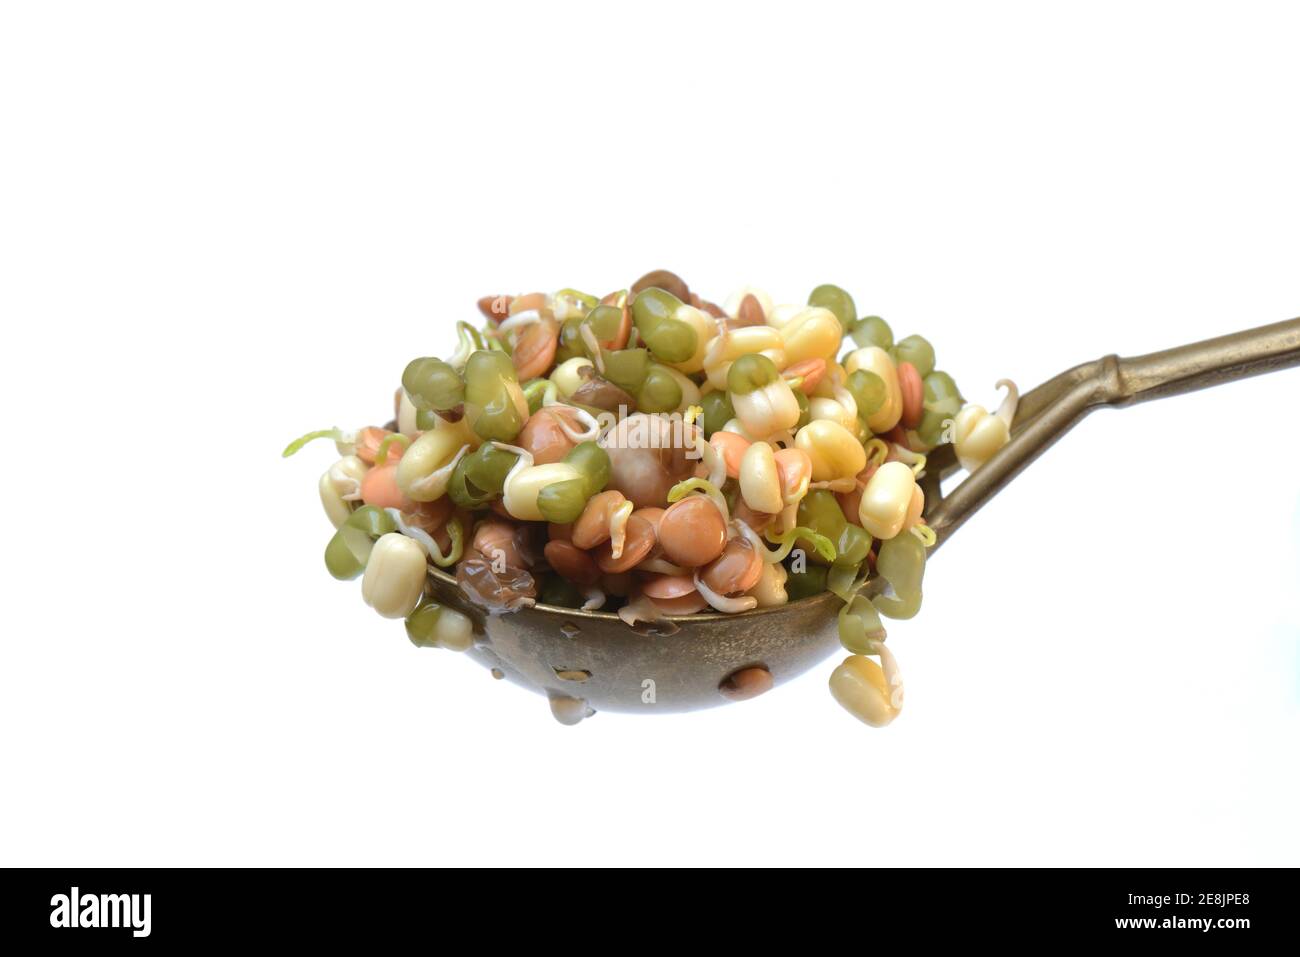 Mixed sprouts of lentils, mung beans and chickpeas on ladle, lentil sprouts, mung bean sprouts, chickpea sprouts, Lens culinaris, Vigna radiata Stock Photo